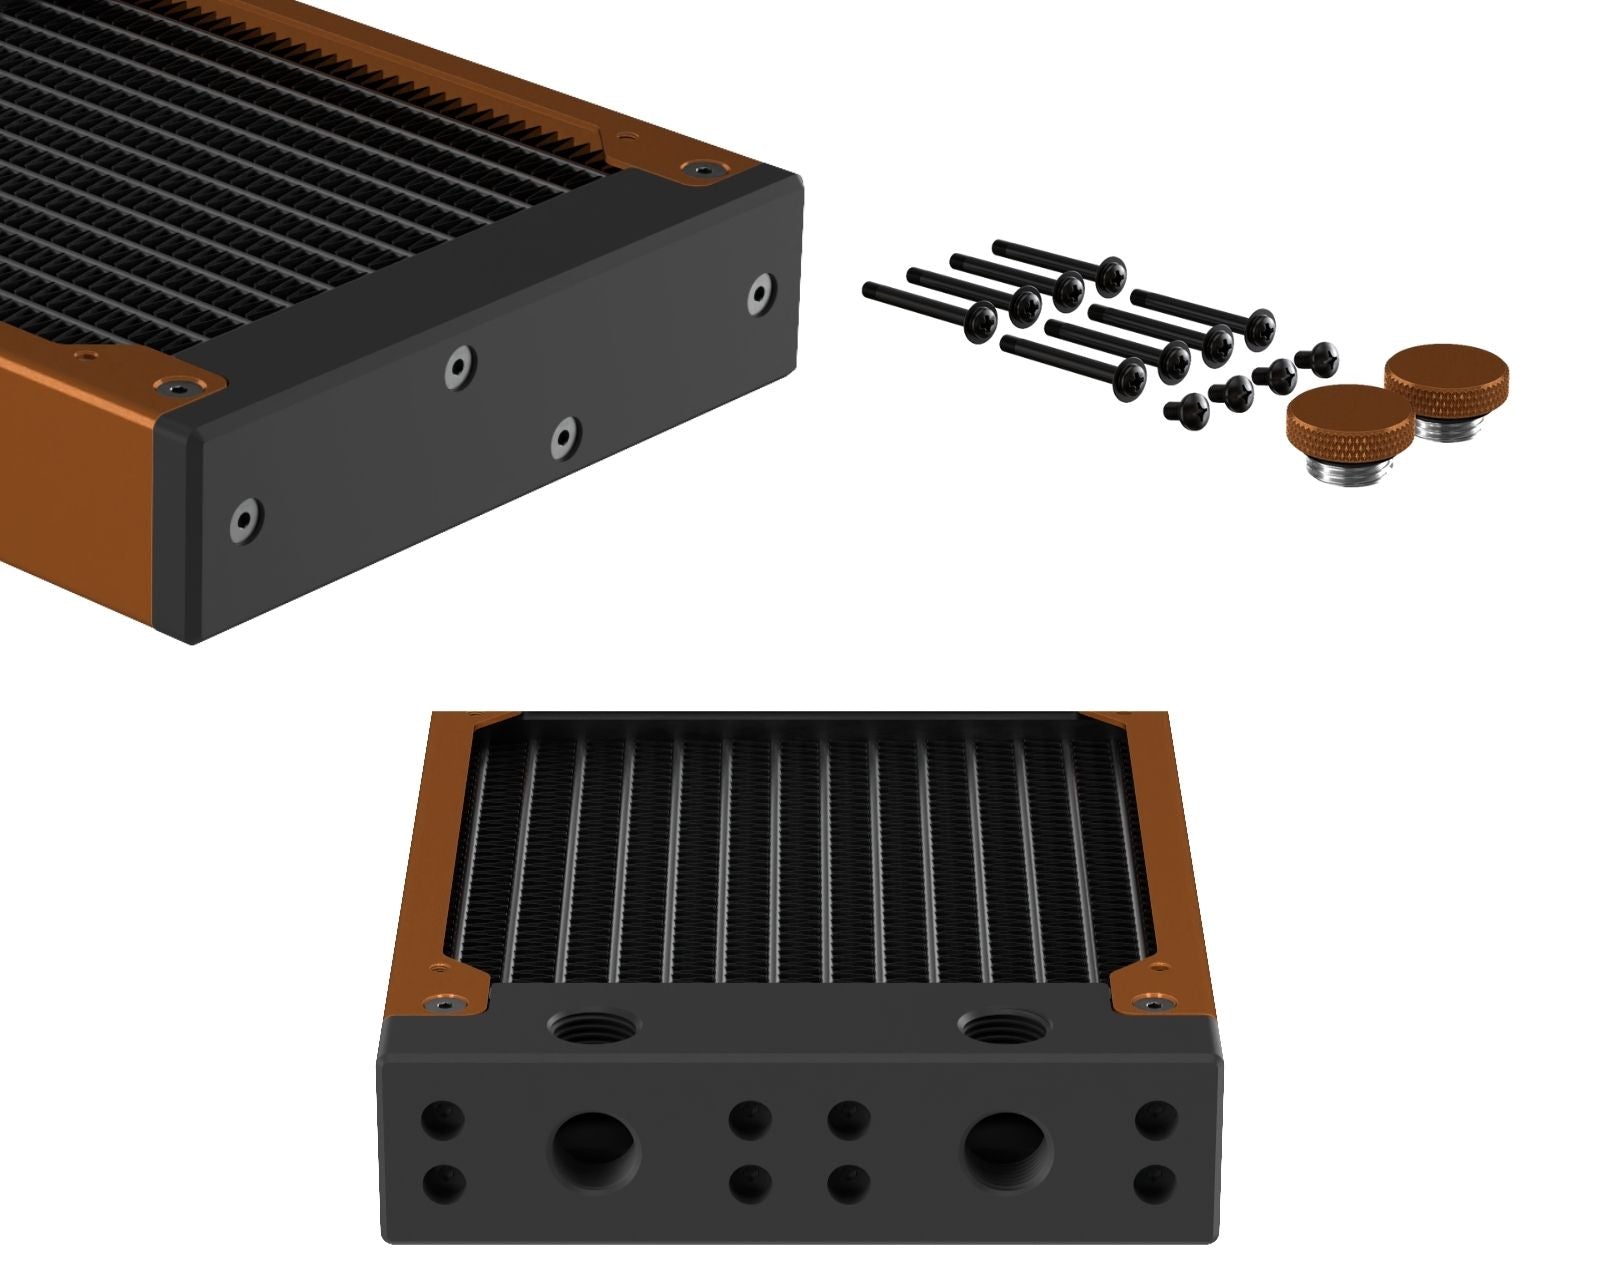 PrimoChill 240SL (30mm) EXIMO Modular Radiator, Black POM, 2x120mm, Dual Fan (R-SL-BK24) Available in 20+ Colors, Assembled in USA and Custom Watercooling Loop Ready - Copper